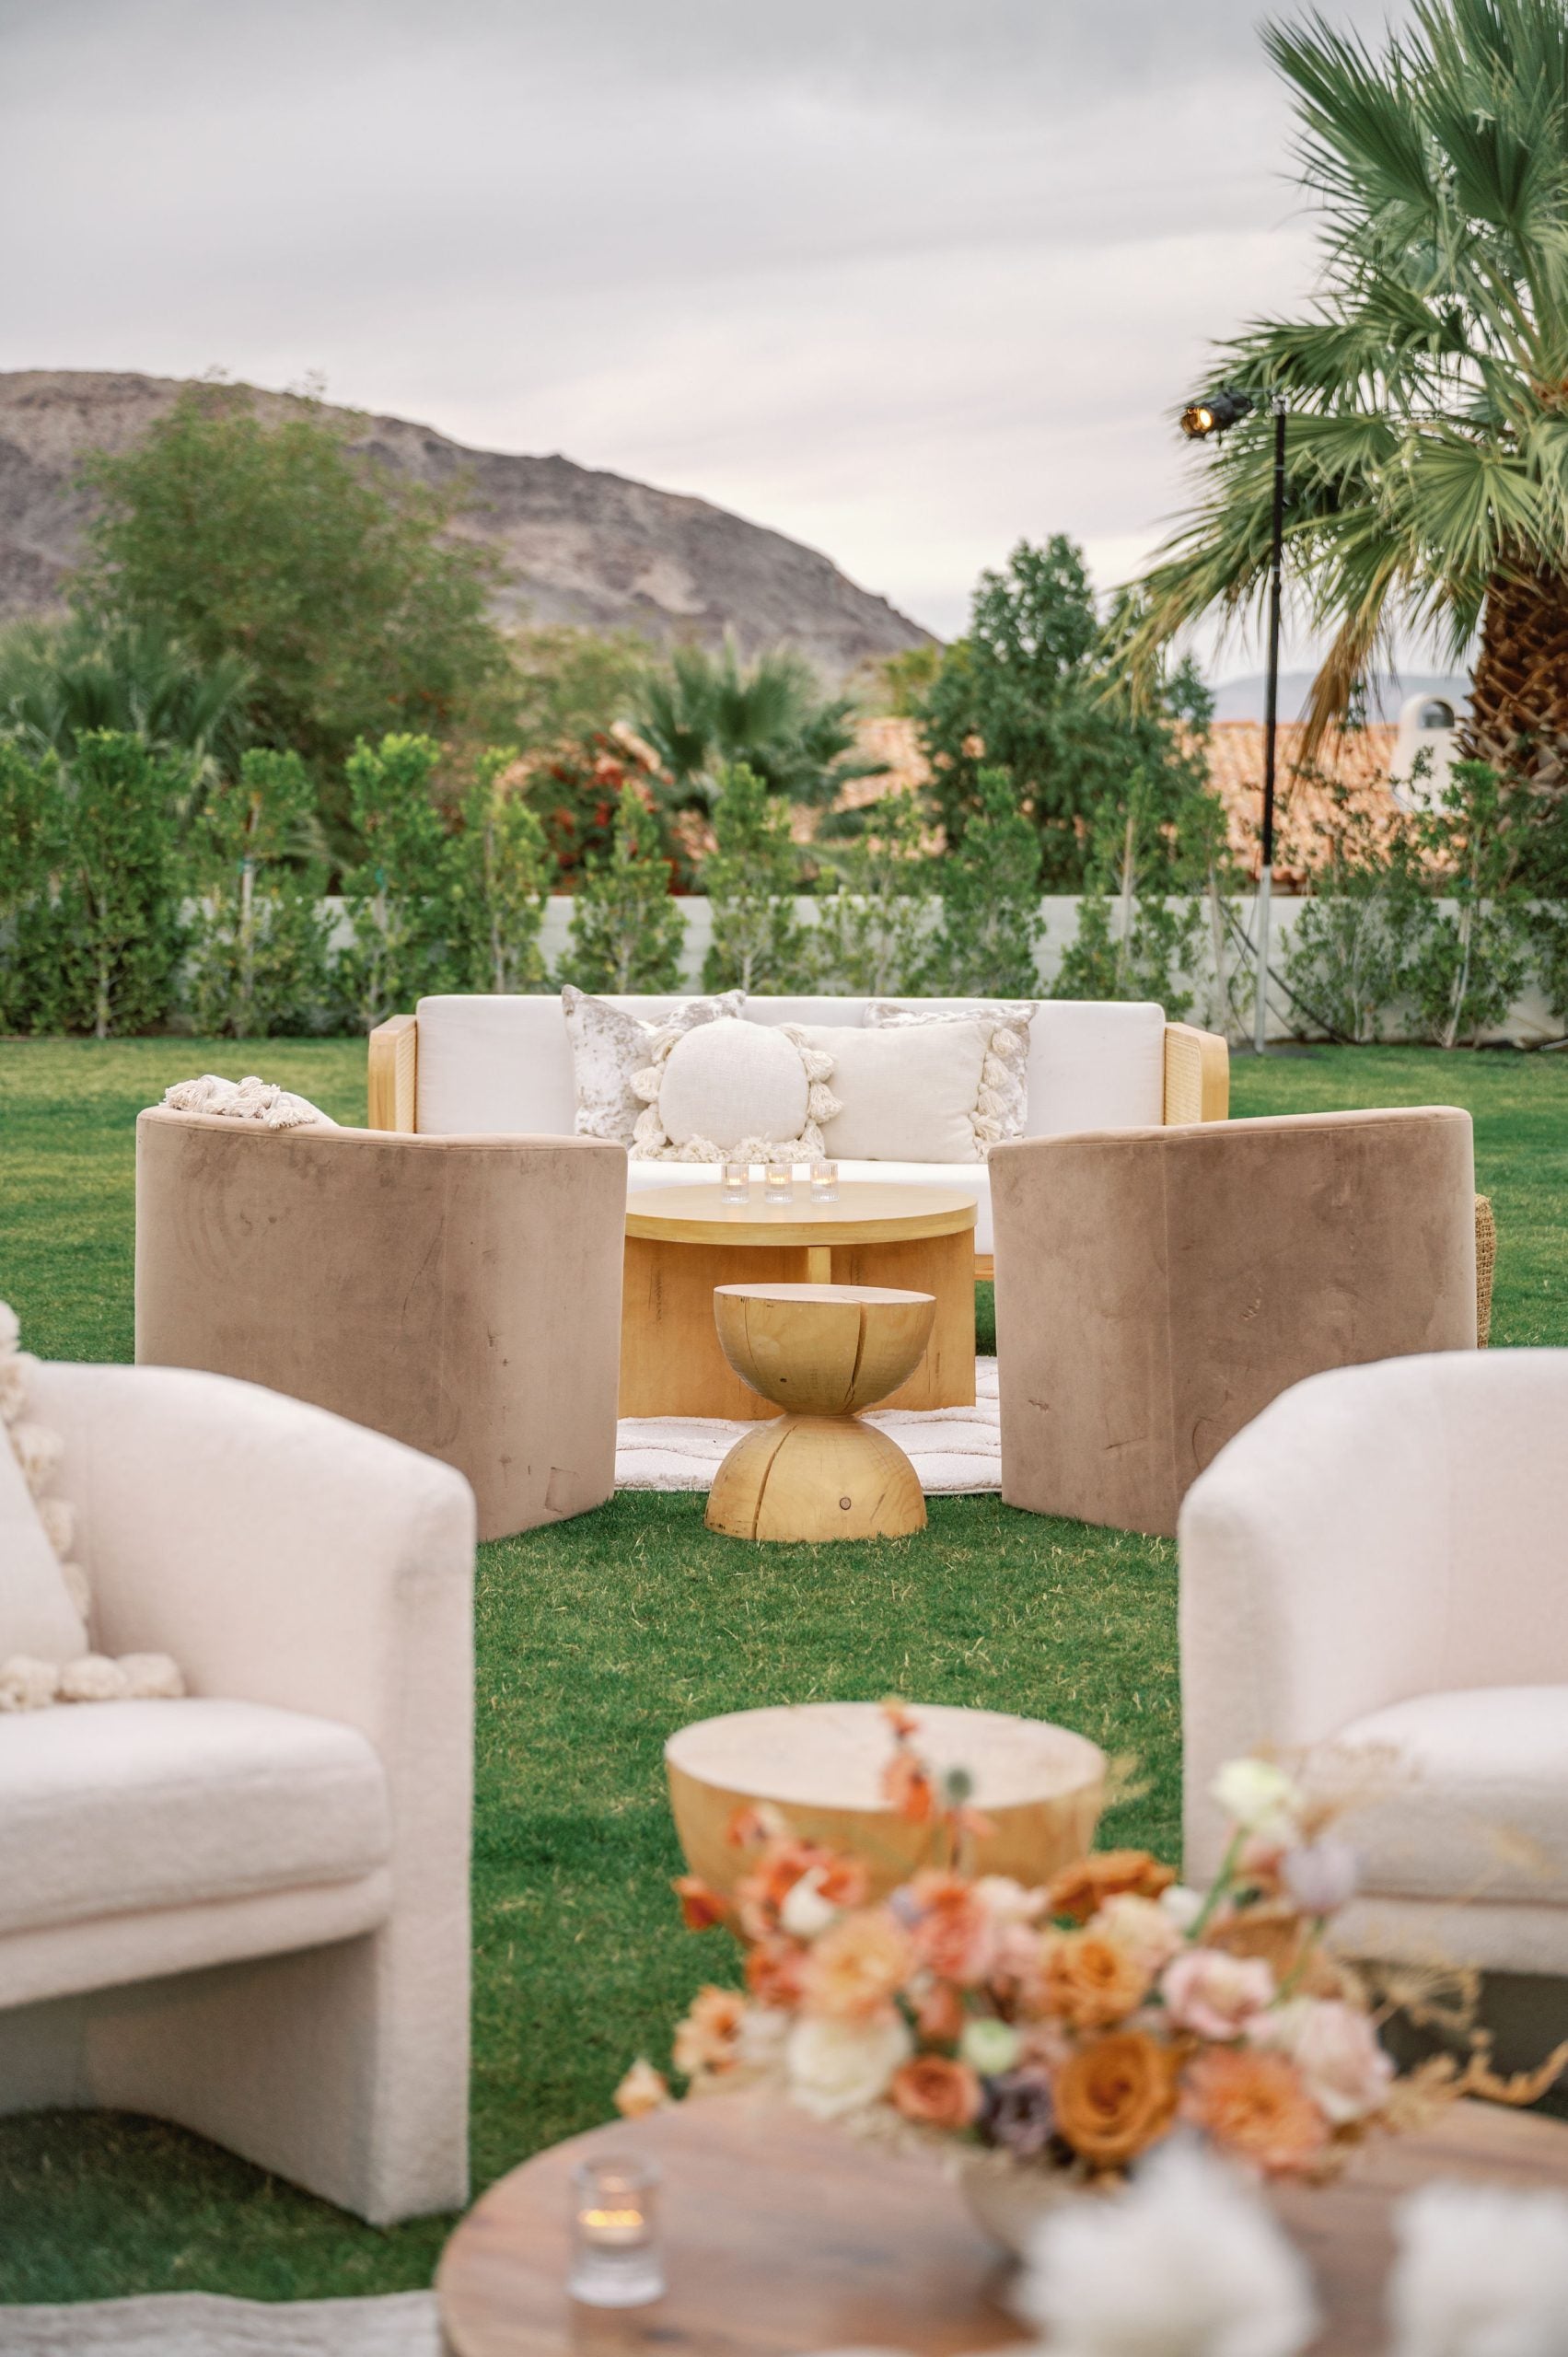 Bridal Bliss: Kendra And Diallobe Said “I Do” In A Magical Celebration In The SoCal Desert